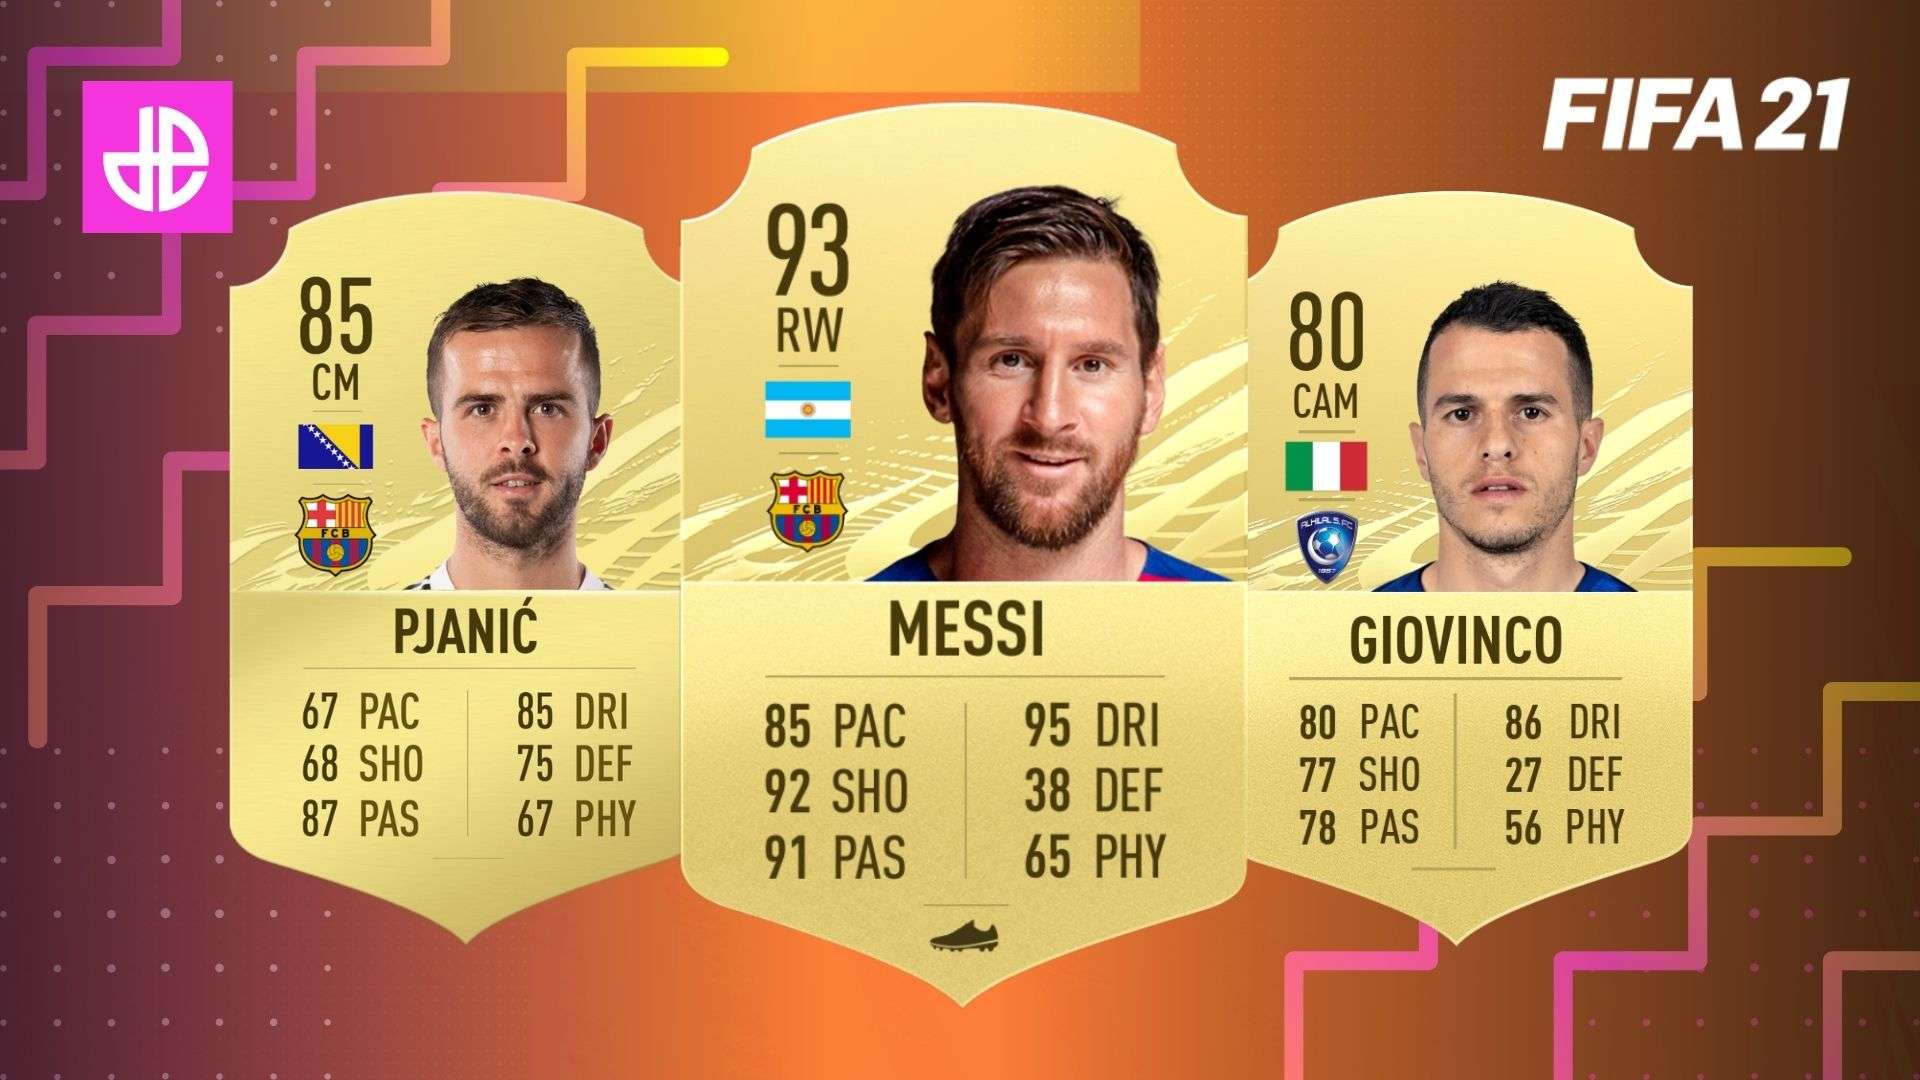 FIFA 21 free kick takers including Messi and Pjanic